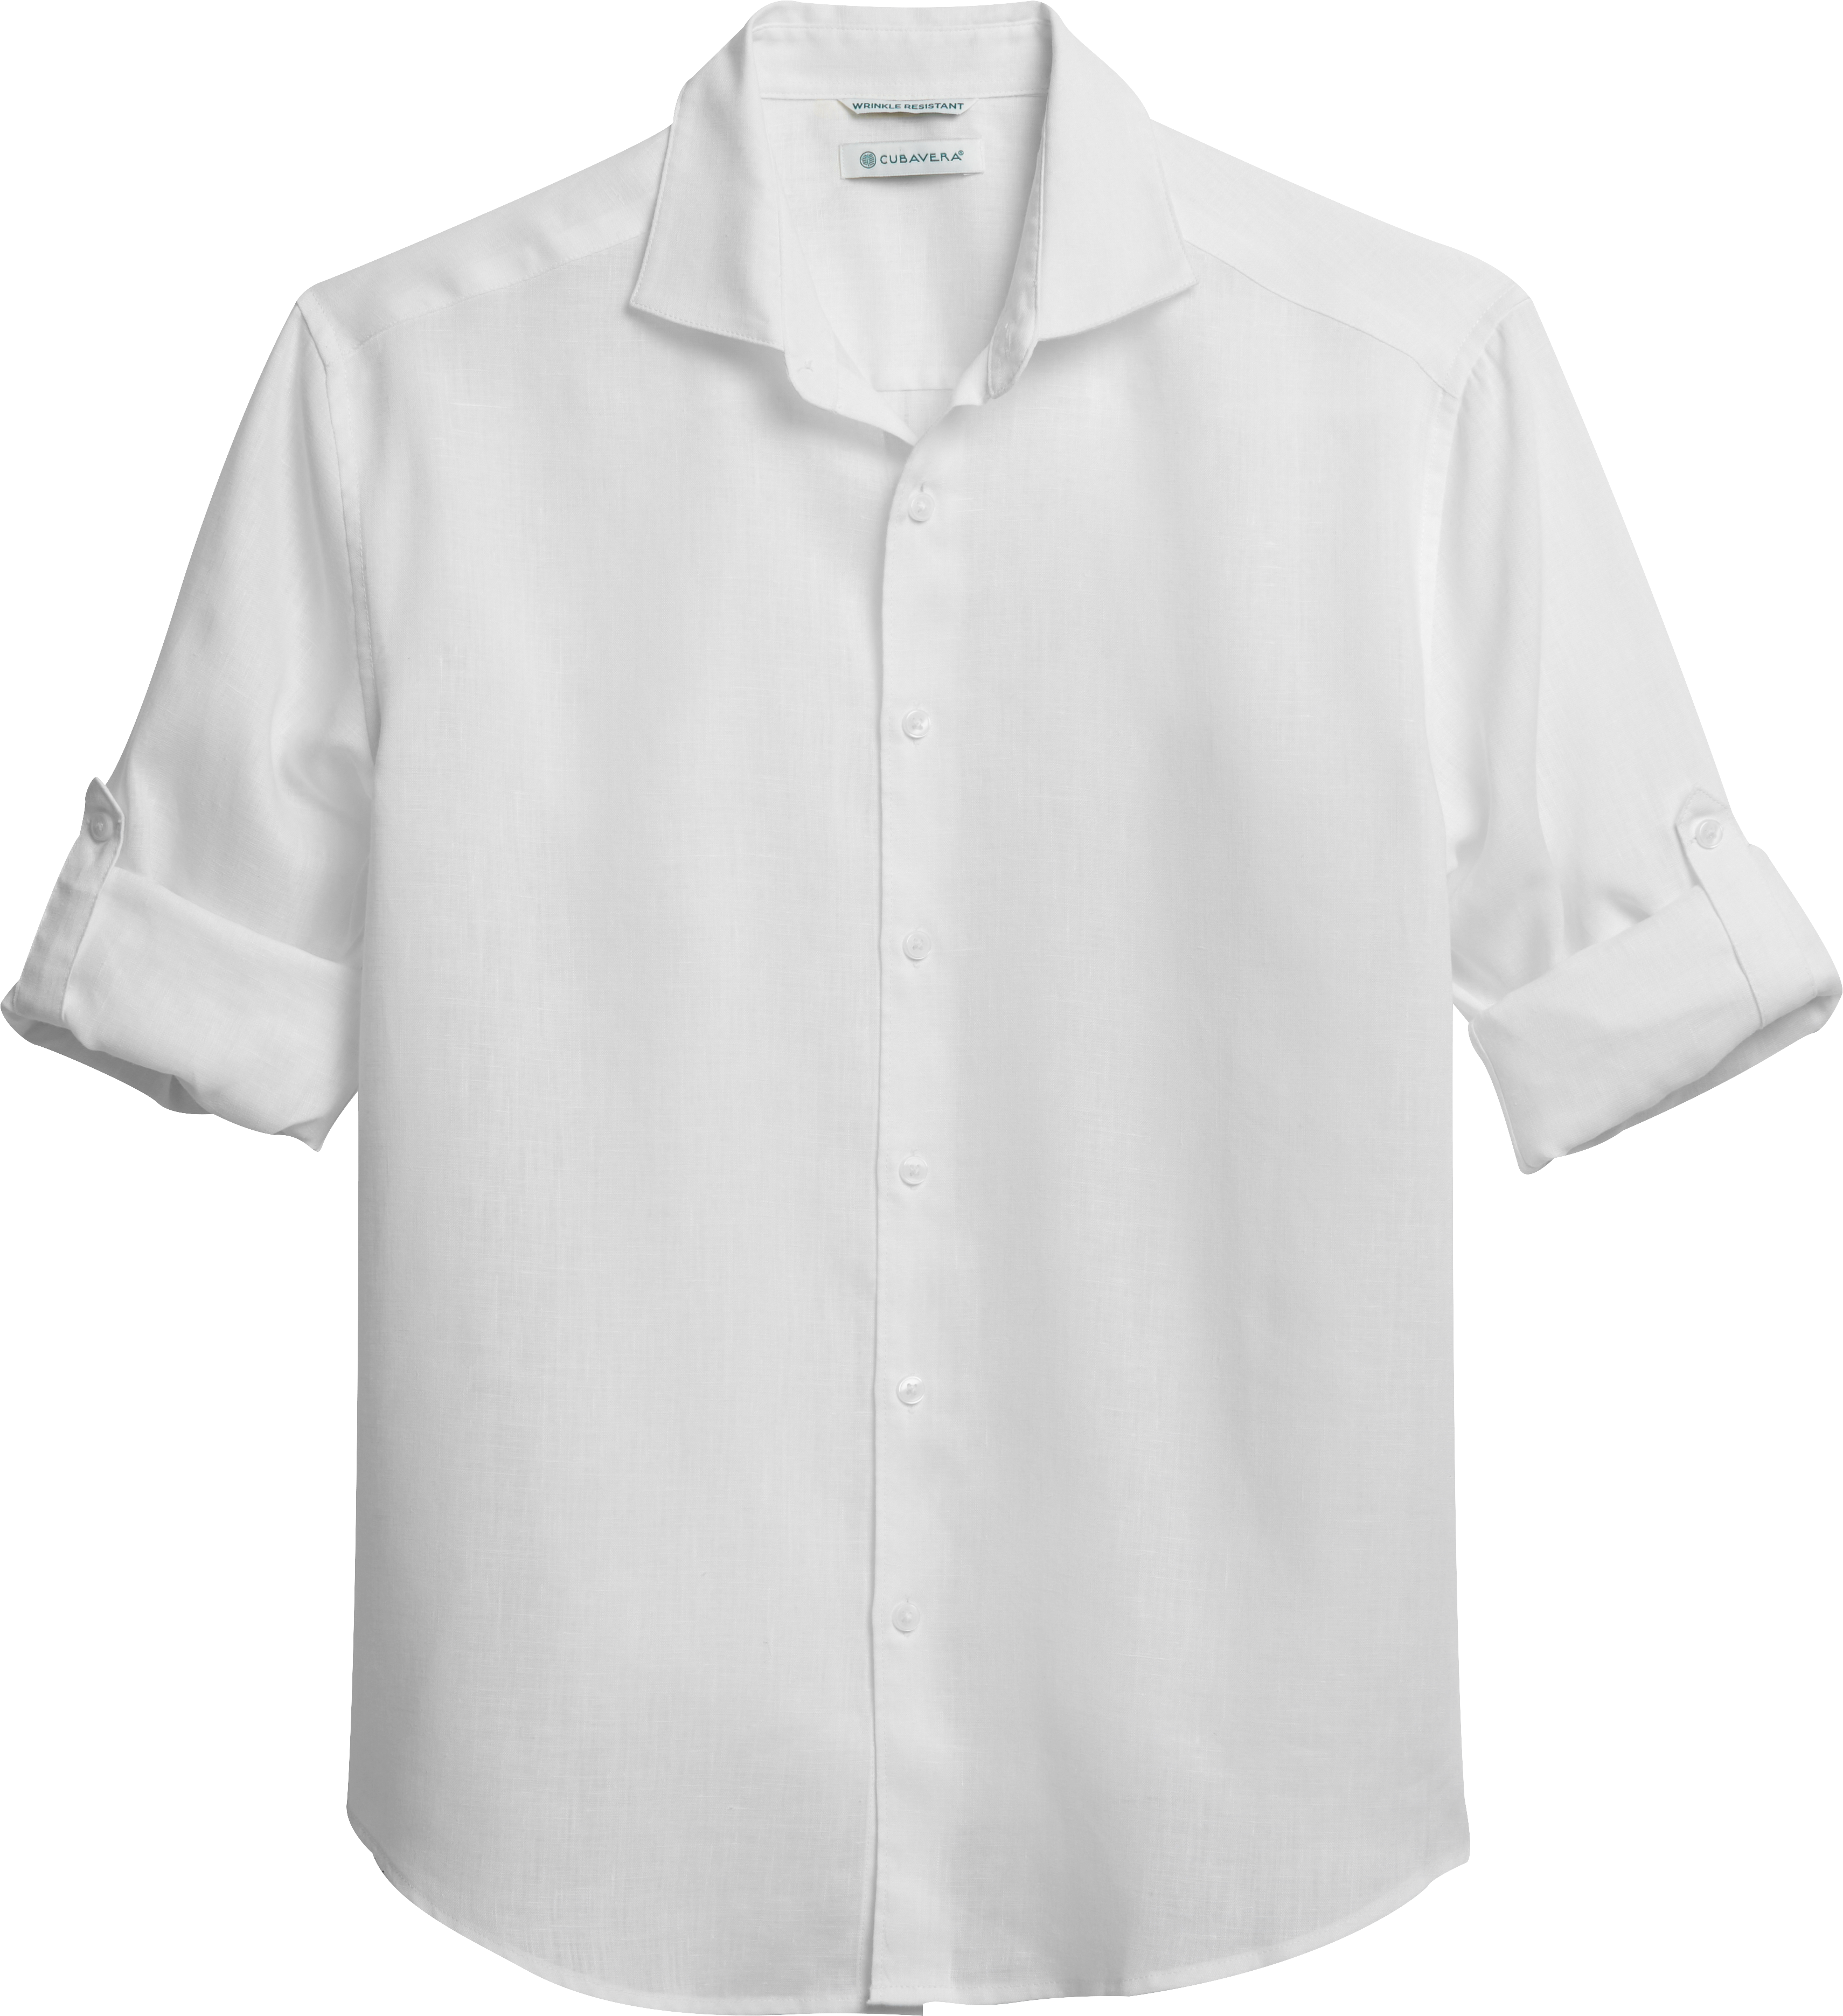 CUBAVERA L/S LINEN BLEND SOLID SHIRT WITH ROLL UP SLEEVES